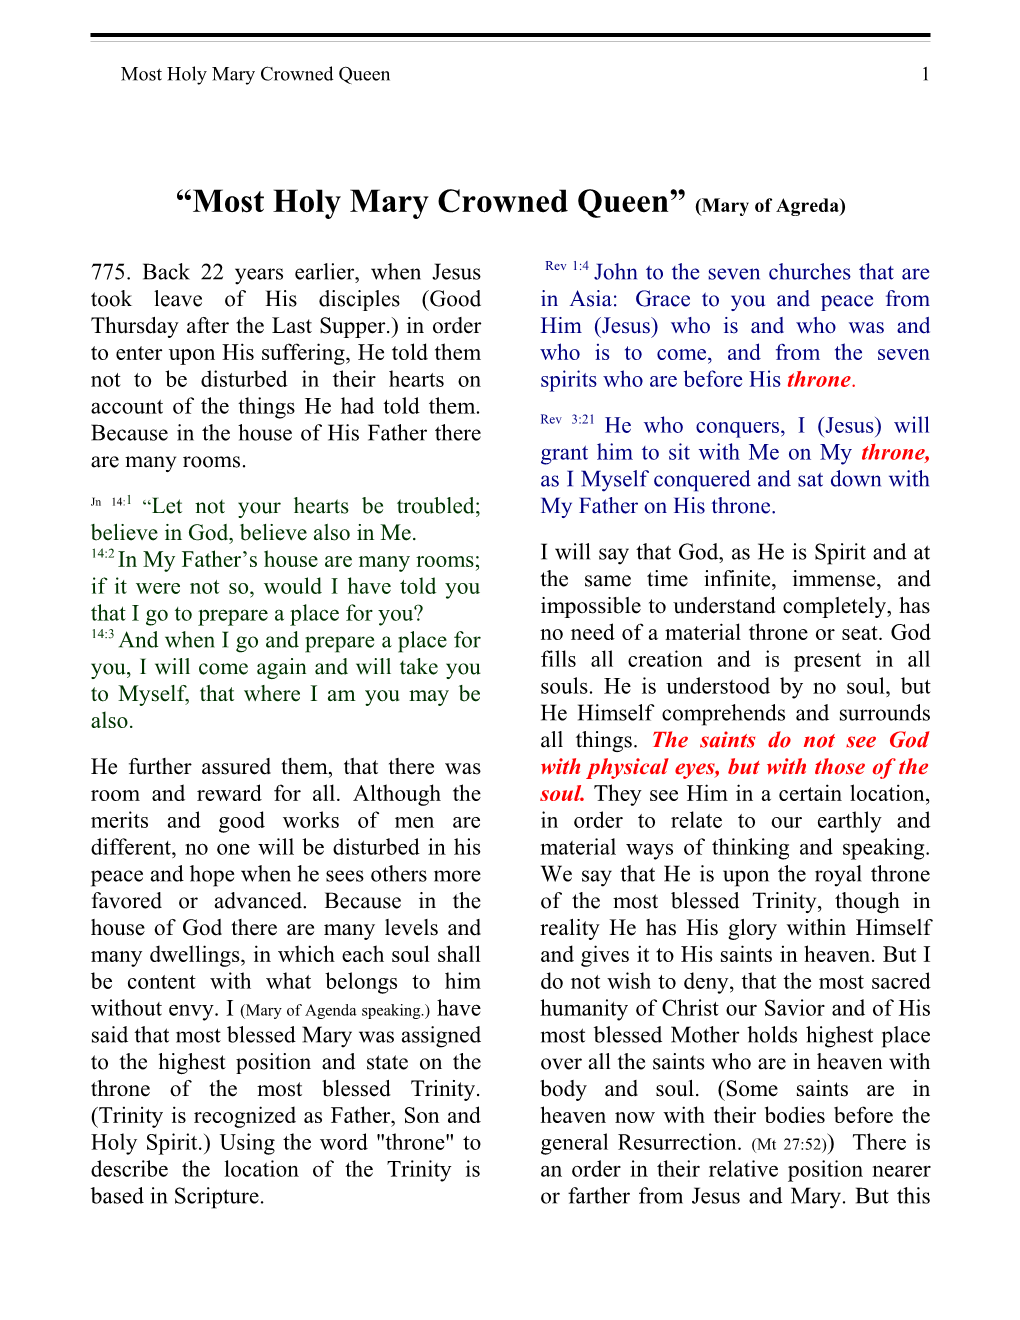 Most Holy Mary Crowned Queen (Mary of Agreda)